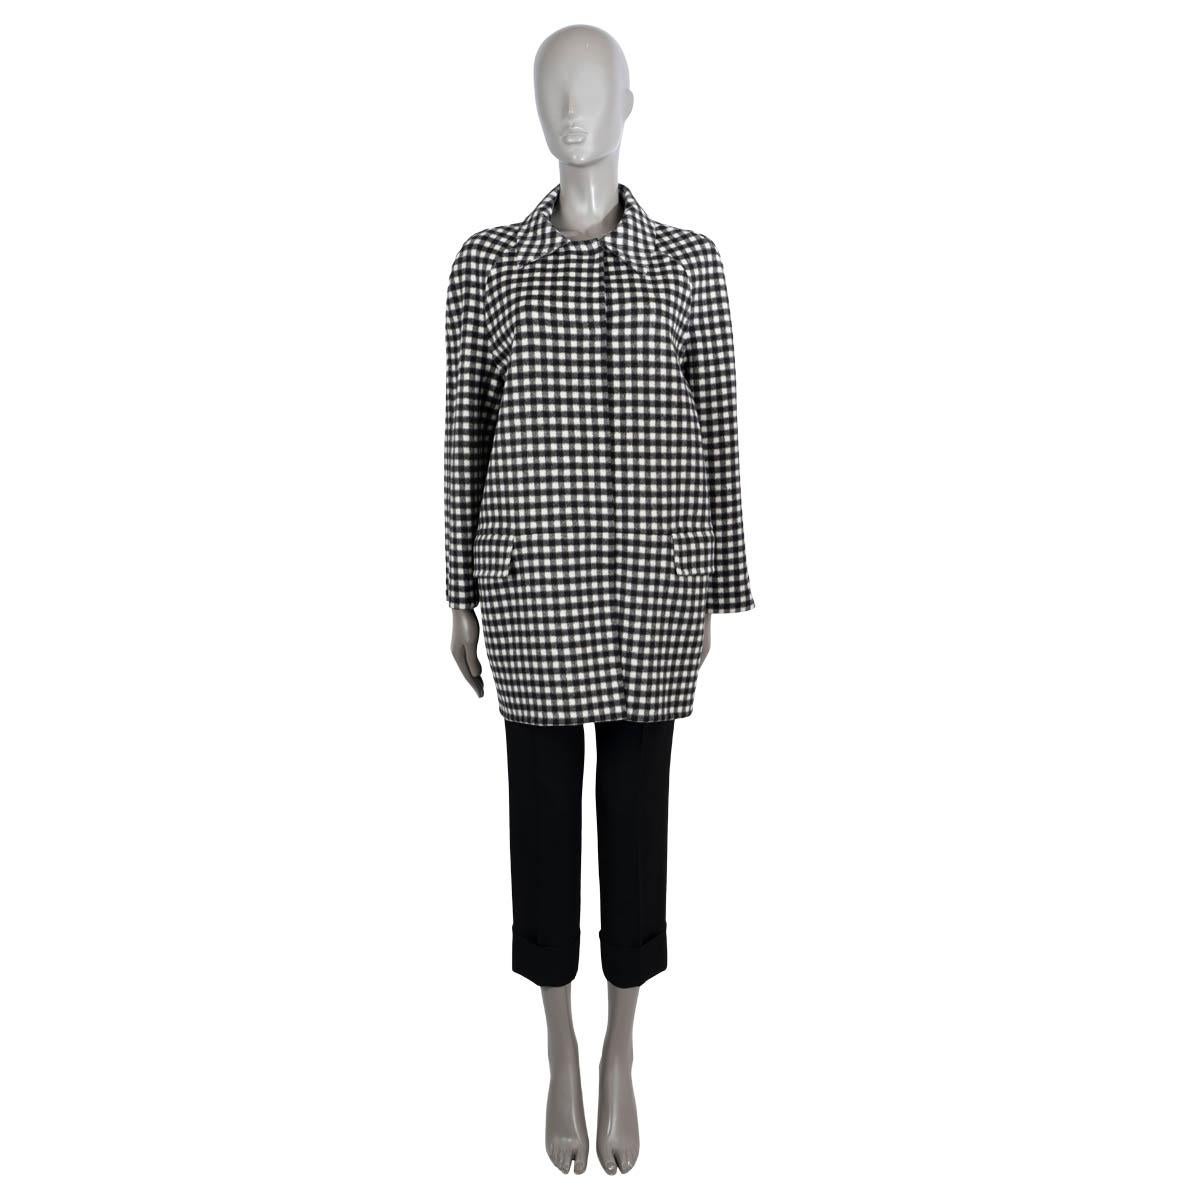 100% authentic Prada gingham coat in black and white wool (100%). Features two flap pockets and raglan sleeves (sleeve measurement taken from the neck). Closes with concealed snap-buttons. Unlined. Has been worn and is in excellent